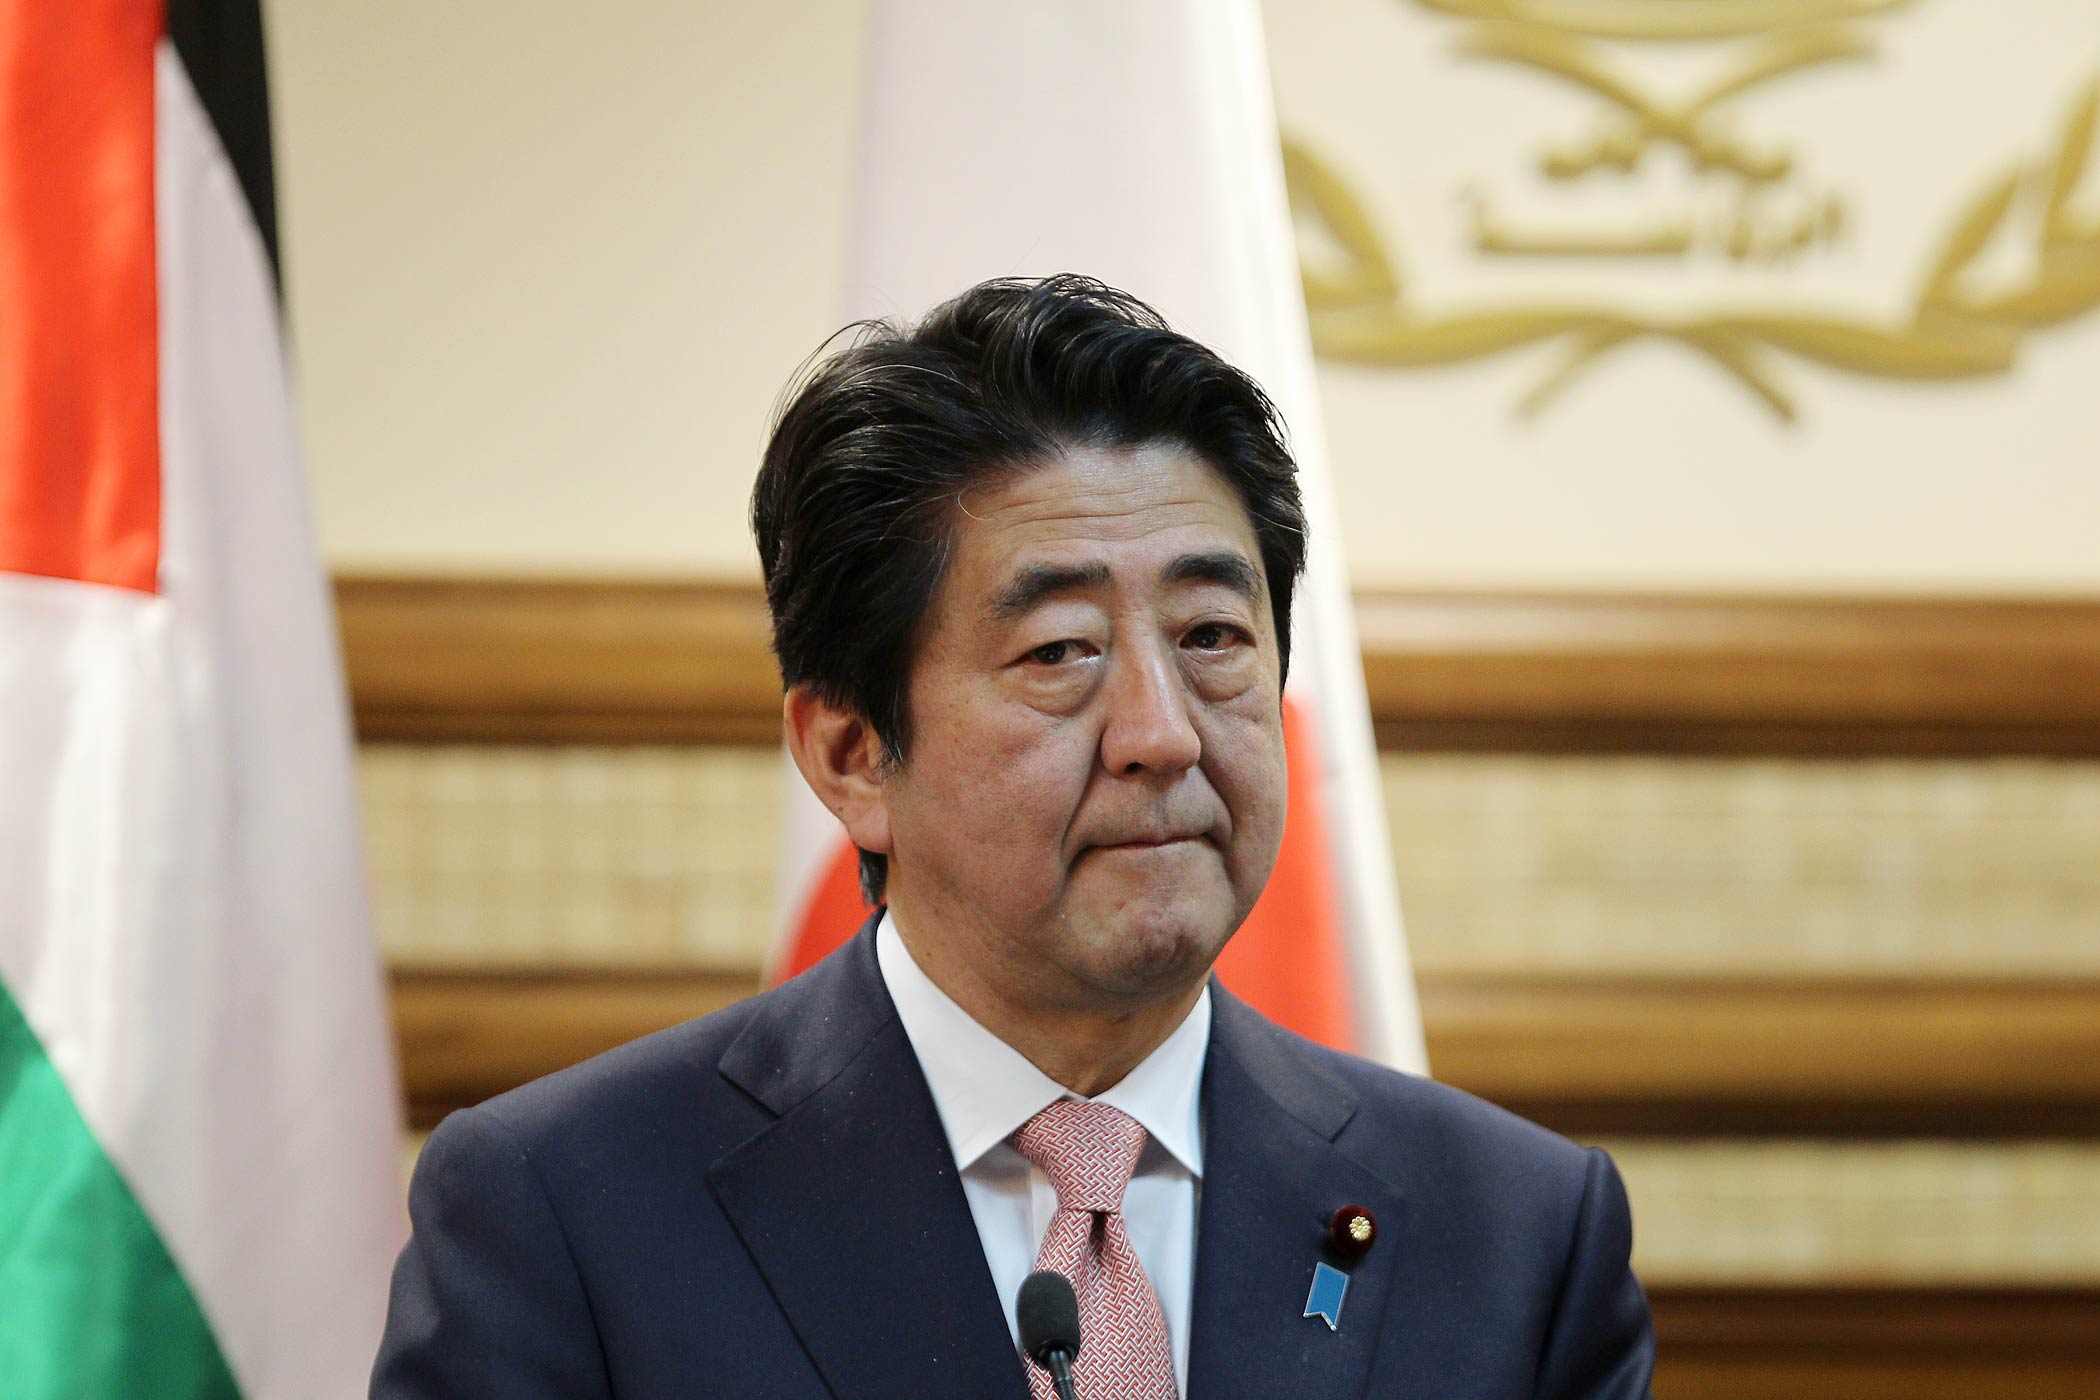 Japan's Prime Minister Shinzo Abe looks on during a press conference with Palestinian president Mahmud Abbas on Jan. 20, 2015, in the West Bank city of Ramallah. (Abbas Momani—AFP/Getty Images)